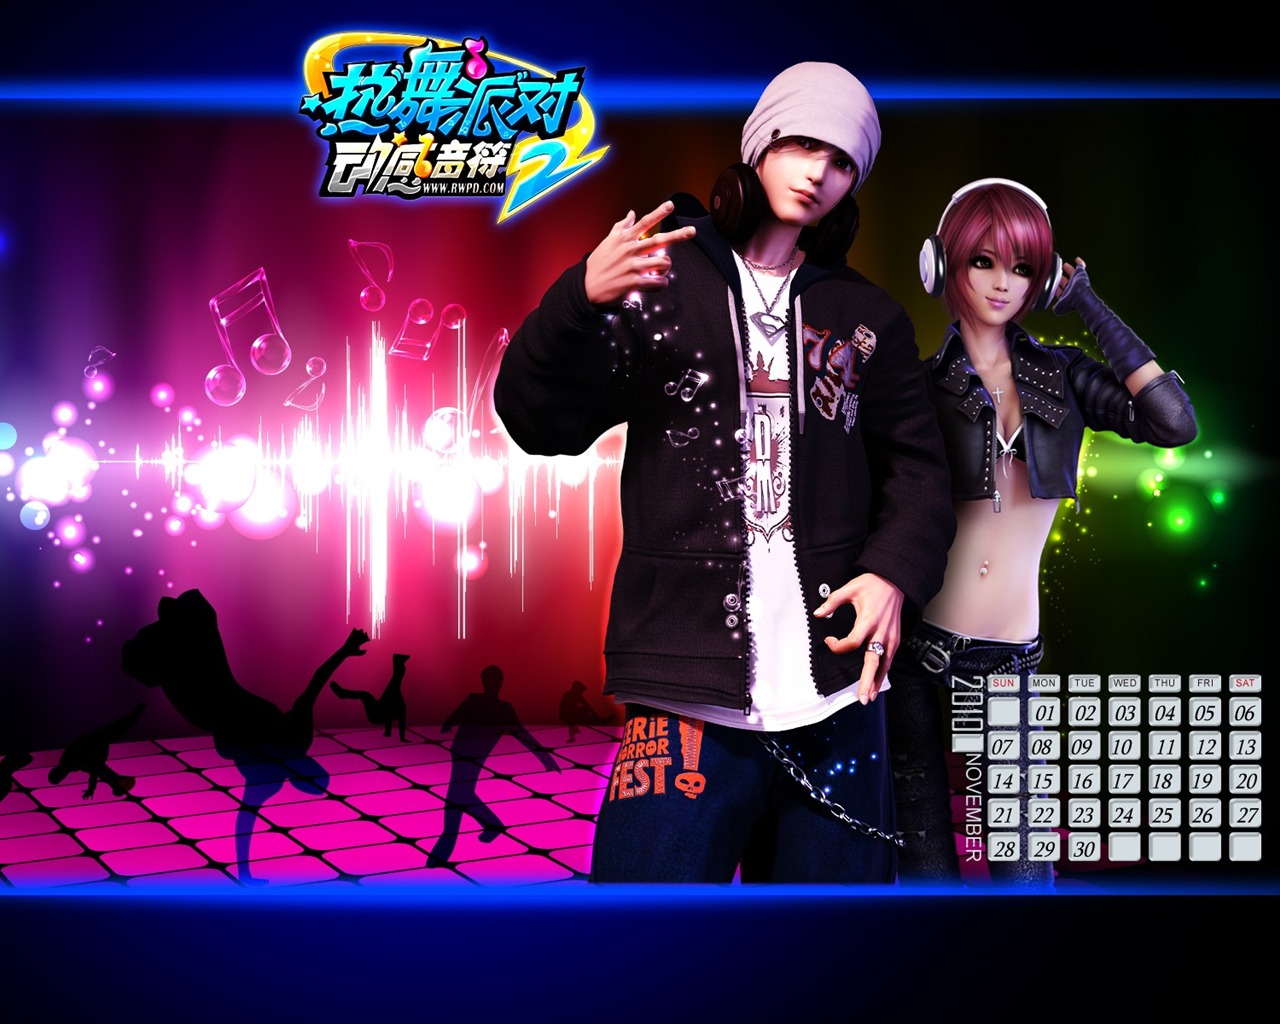 Online game Hot Dance Party II official wallpapers #35 - 1280x1024